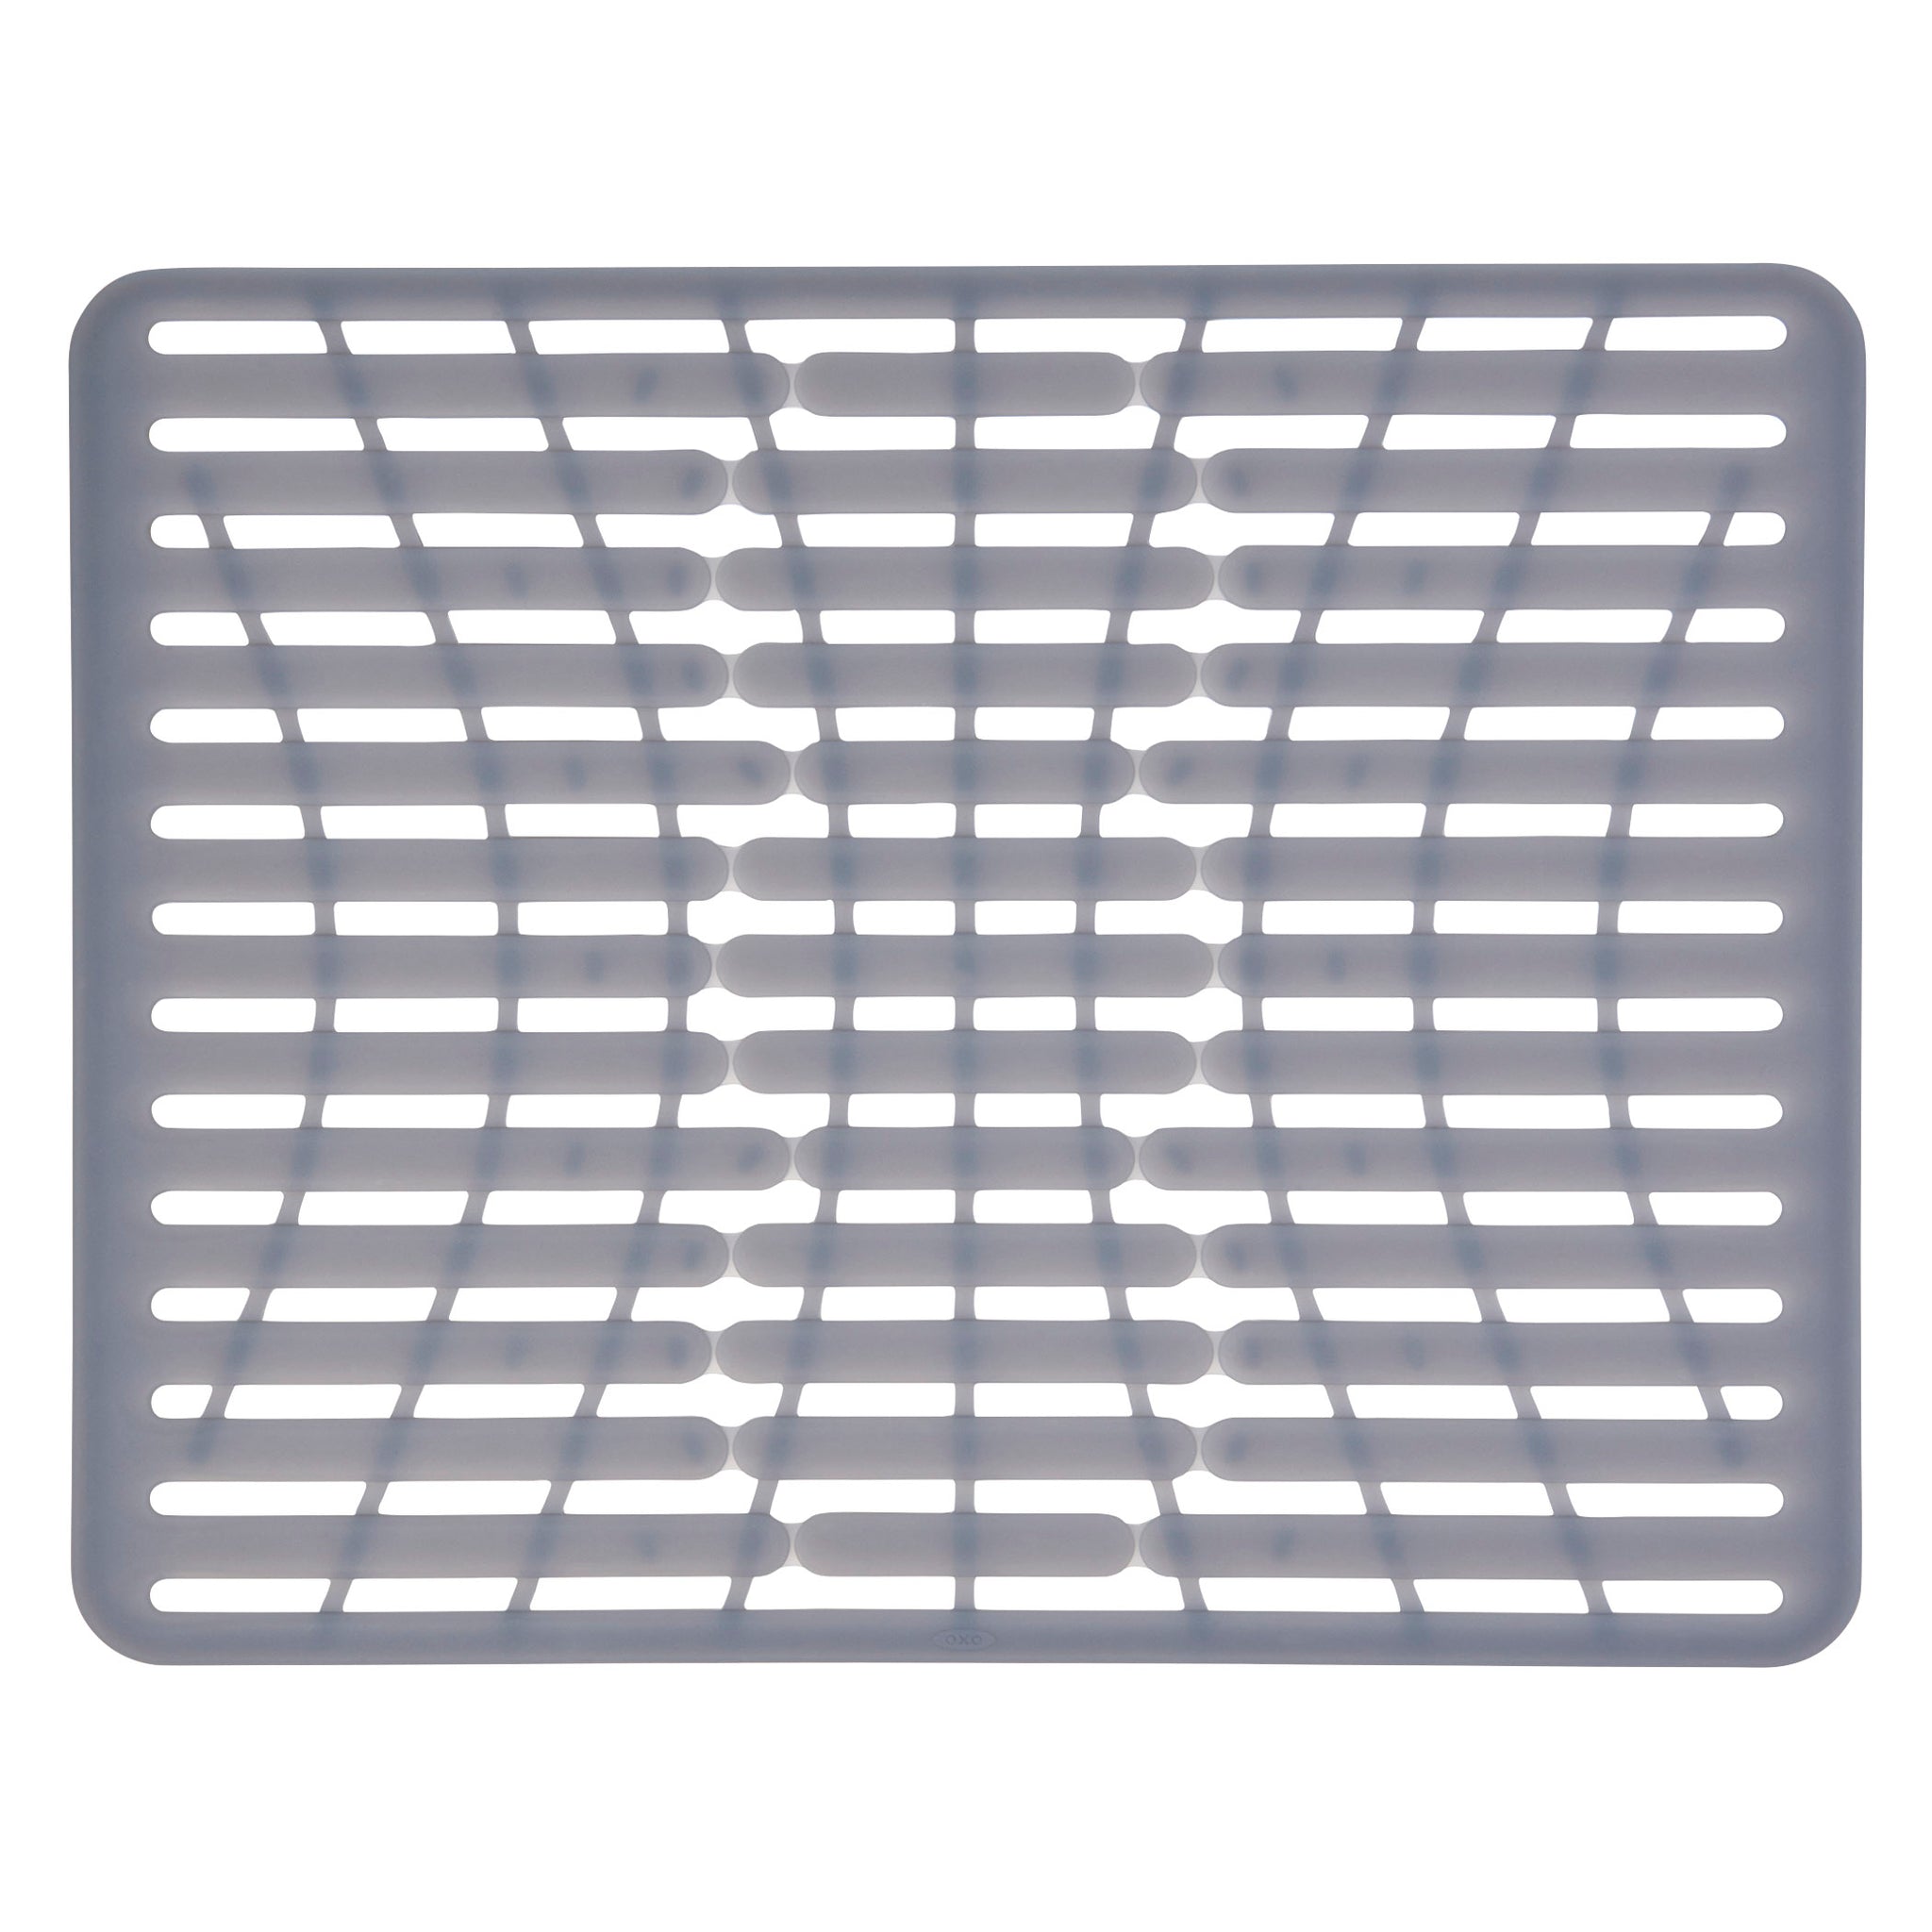 1pc Cream-colored Silicone Sink Drain Mat, Multi-functional Sink